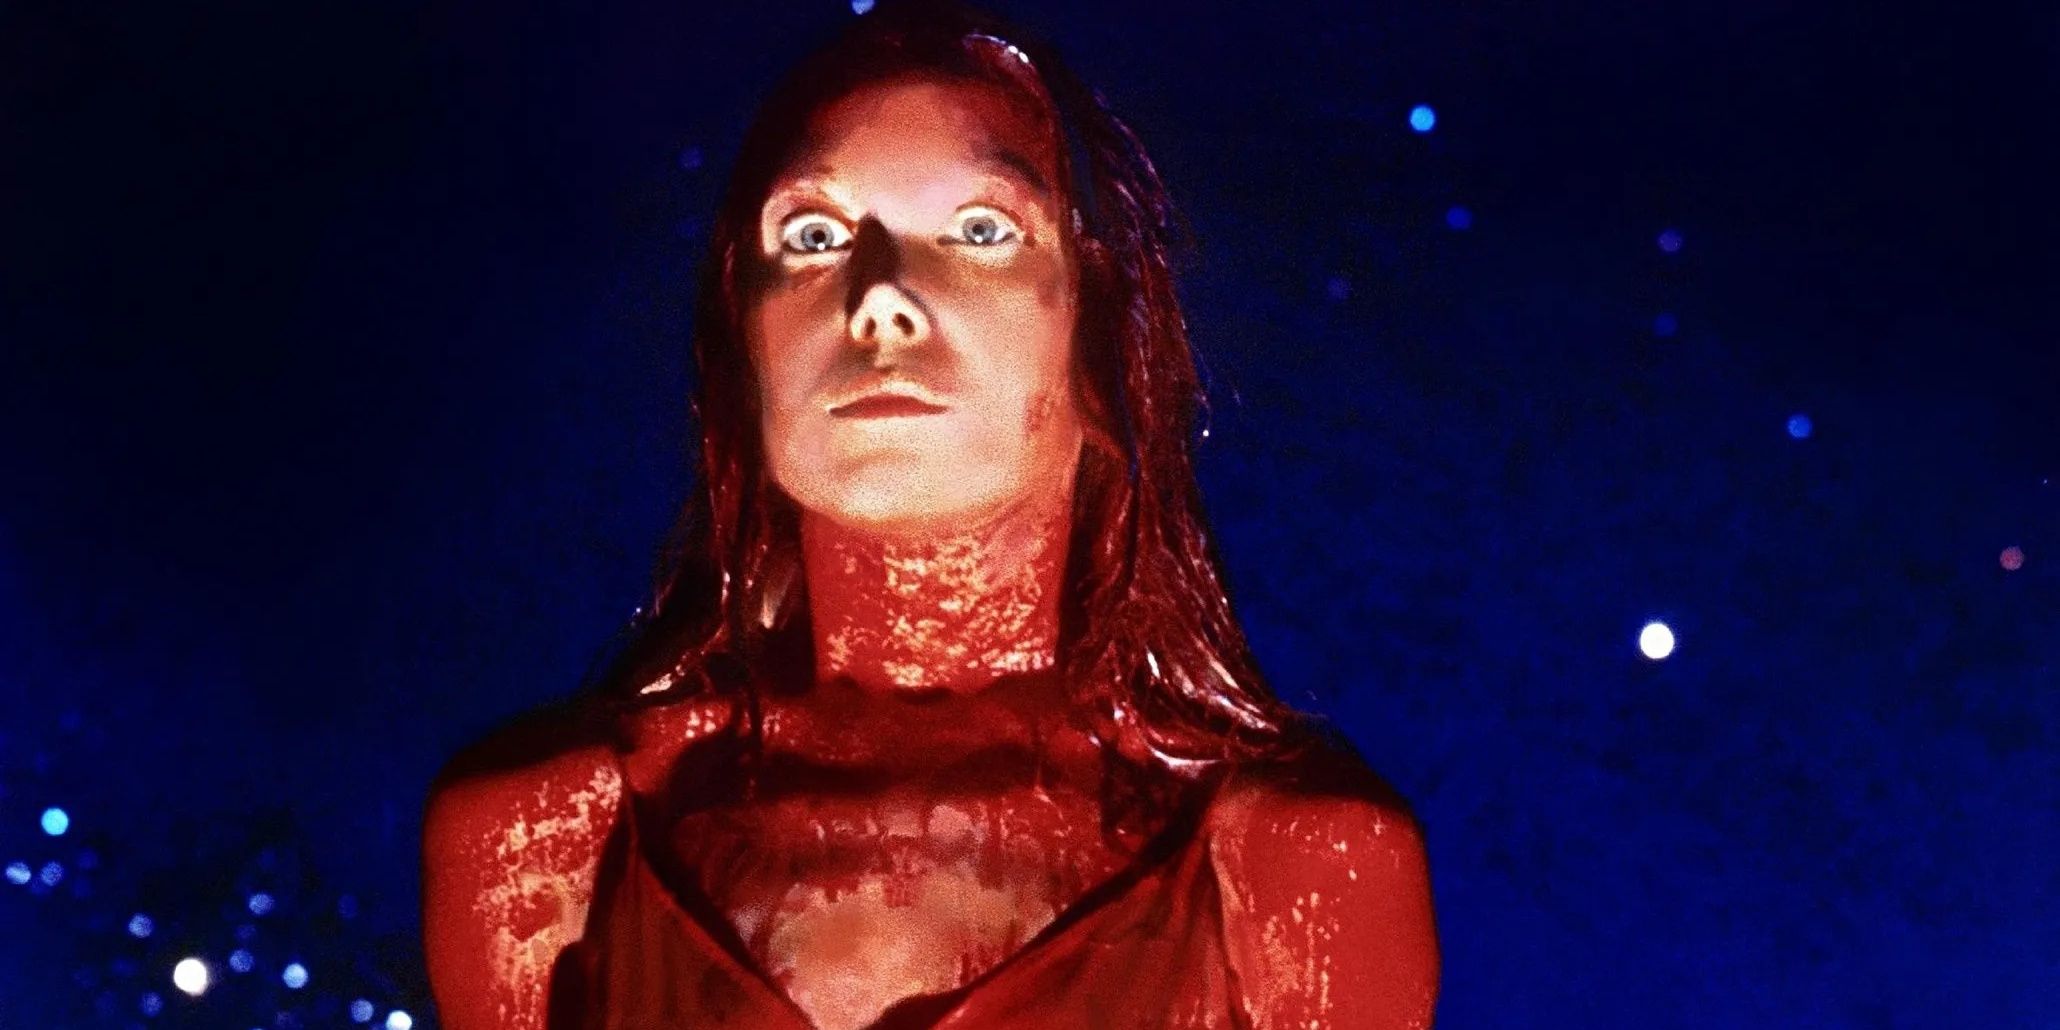 Carrie movie Cropped